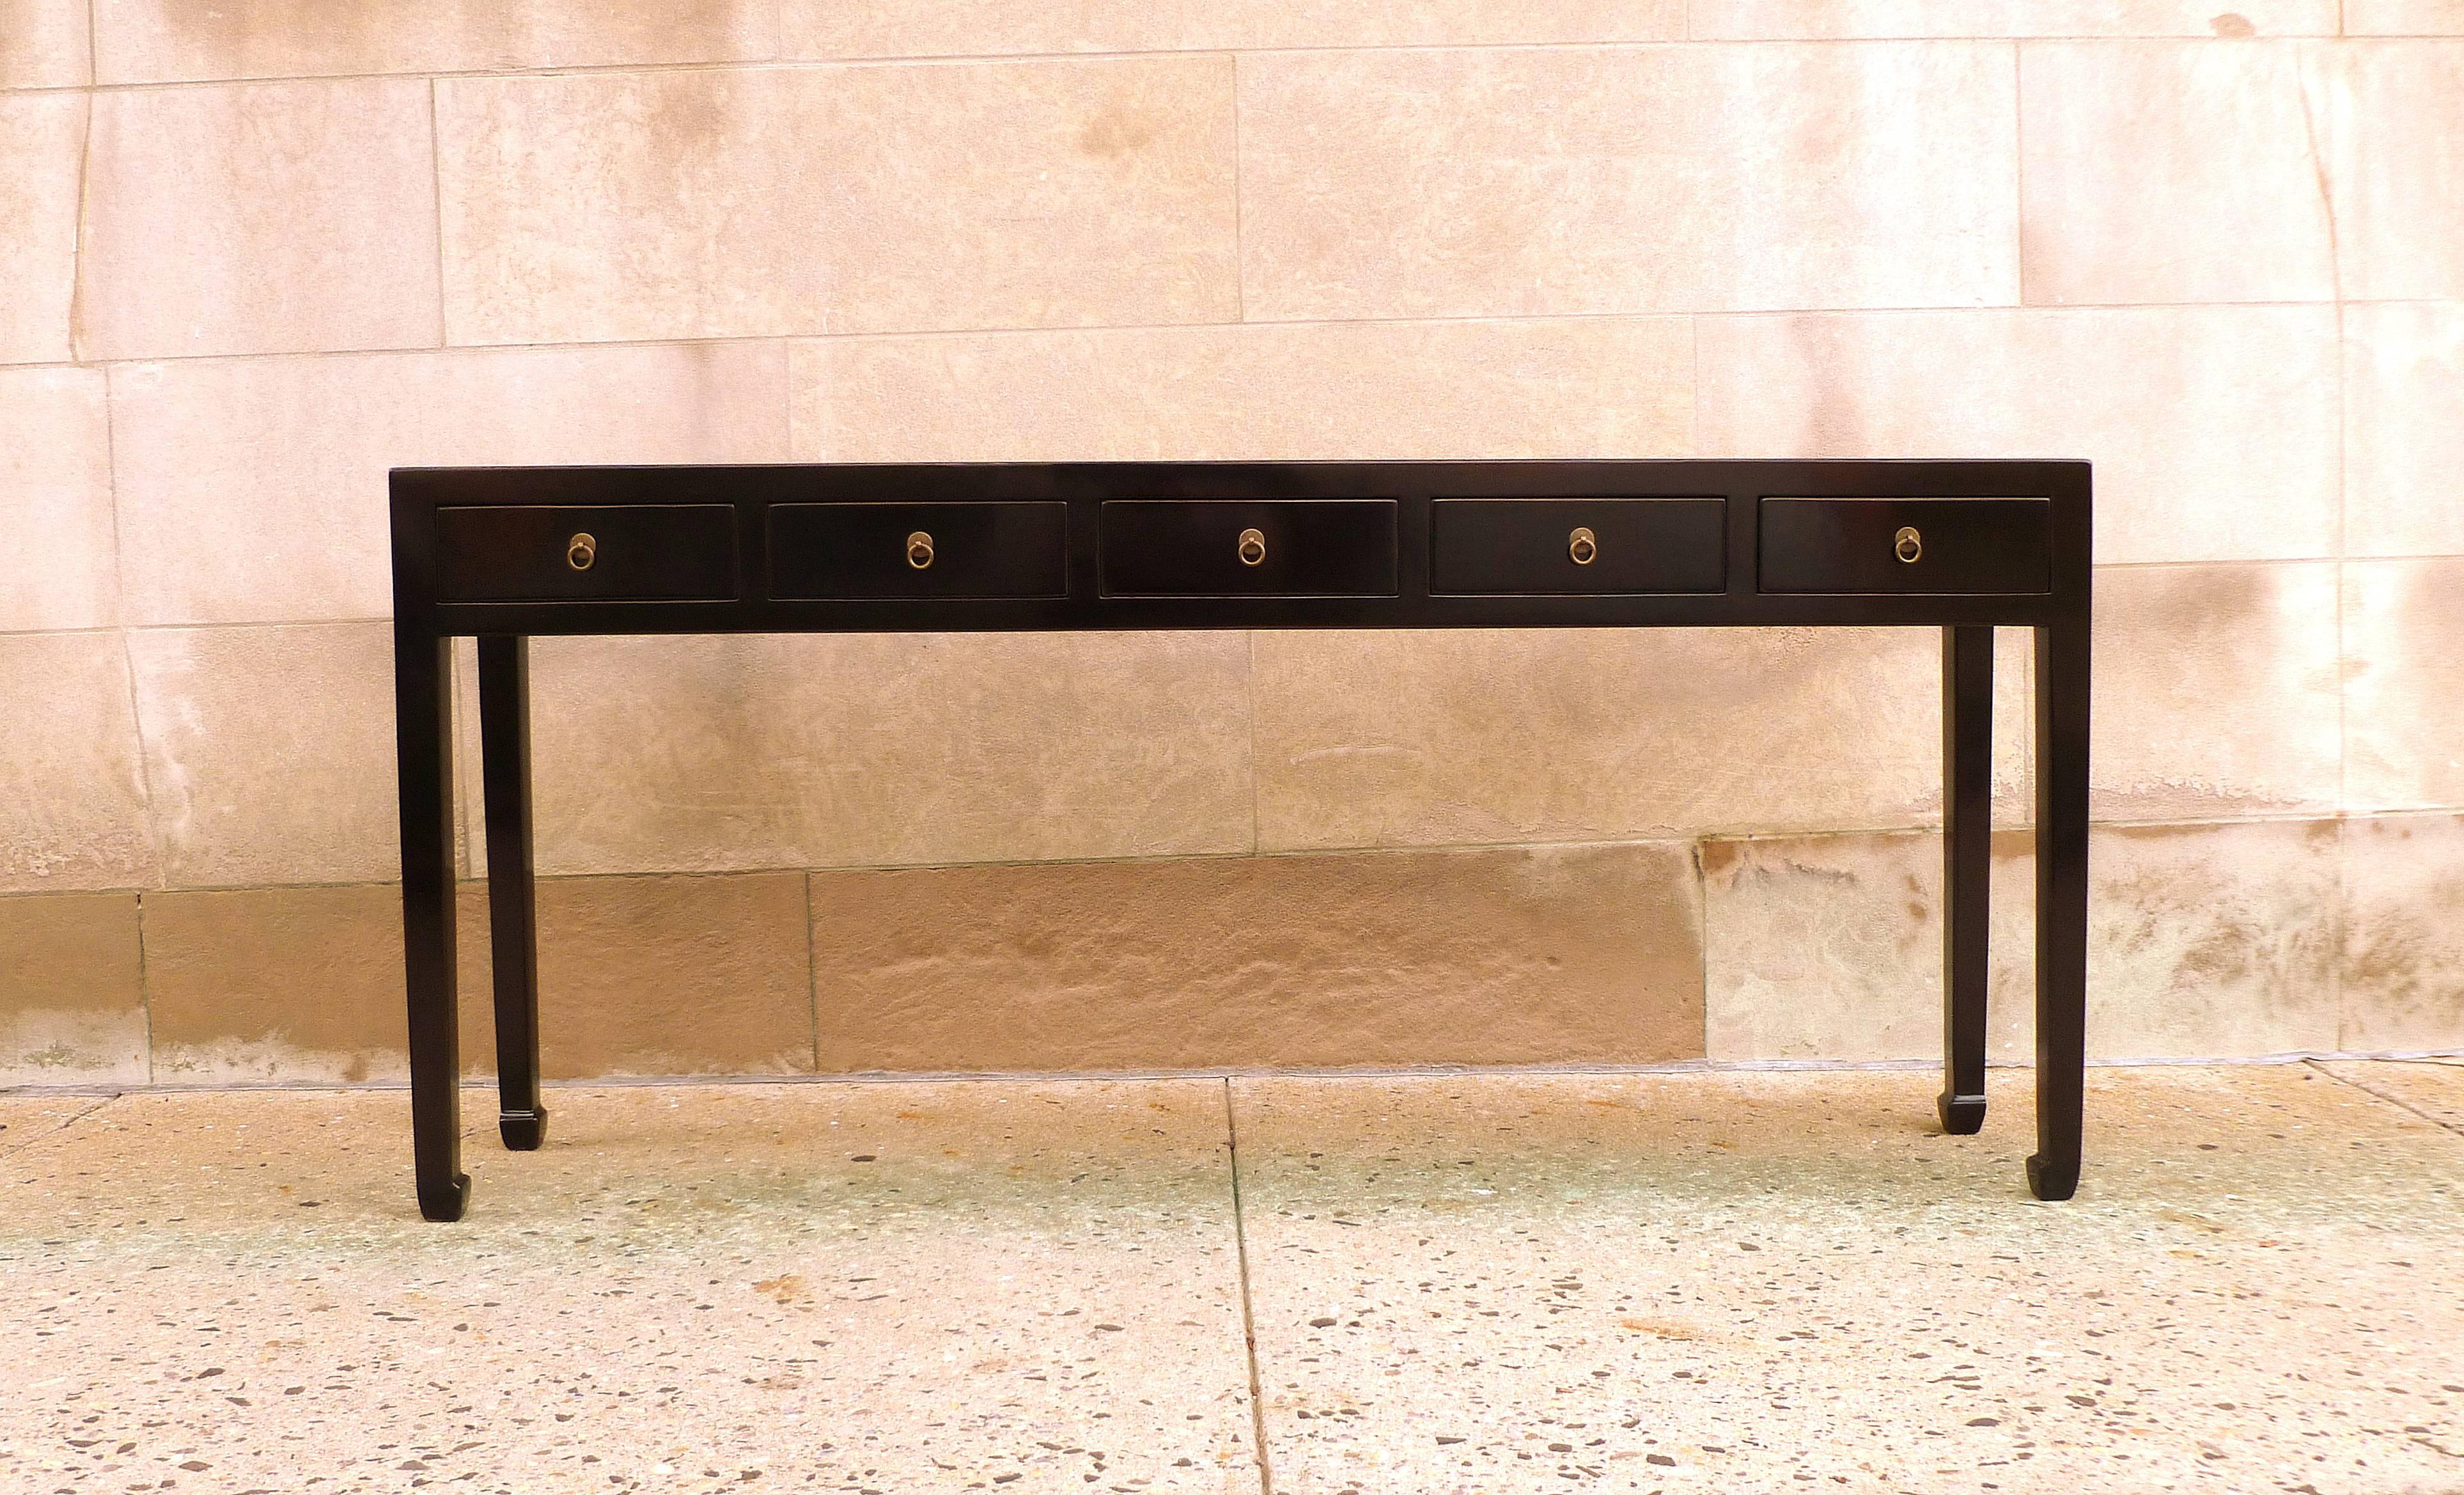 Fine black lacquer console table with drawers with straight legs. Very simple and elegant, fine quality. Beautiful color and form.